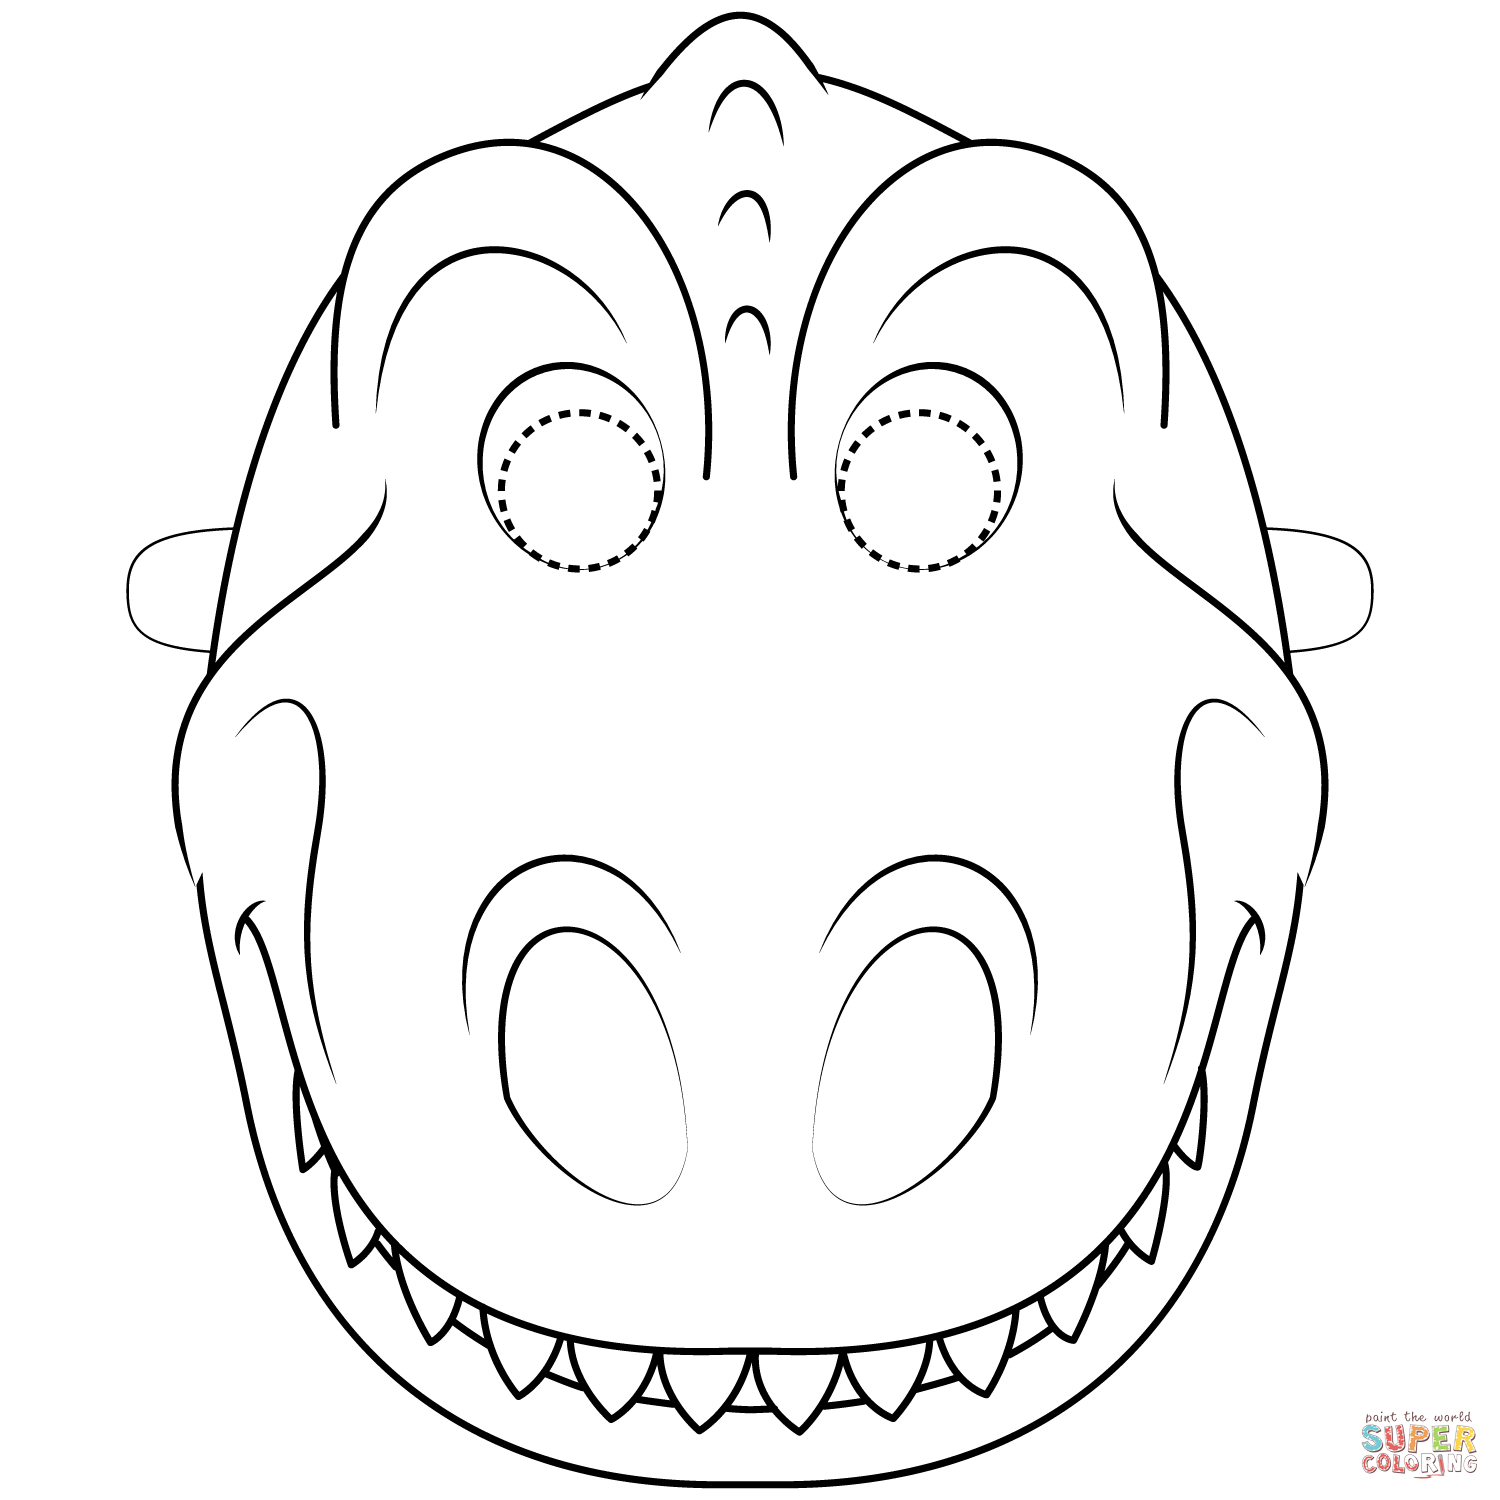 Dinosaur mask coloring page free printable coloring pages